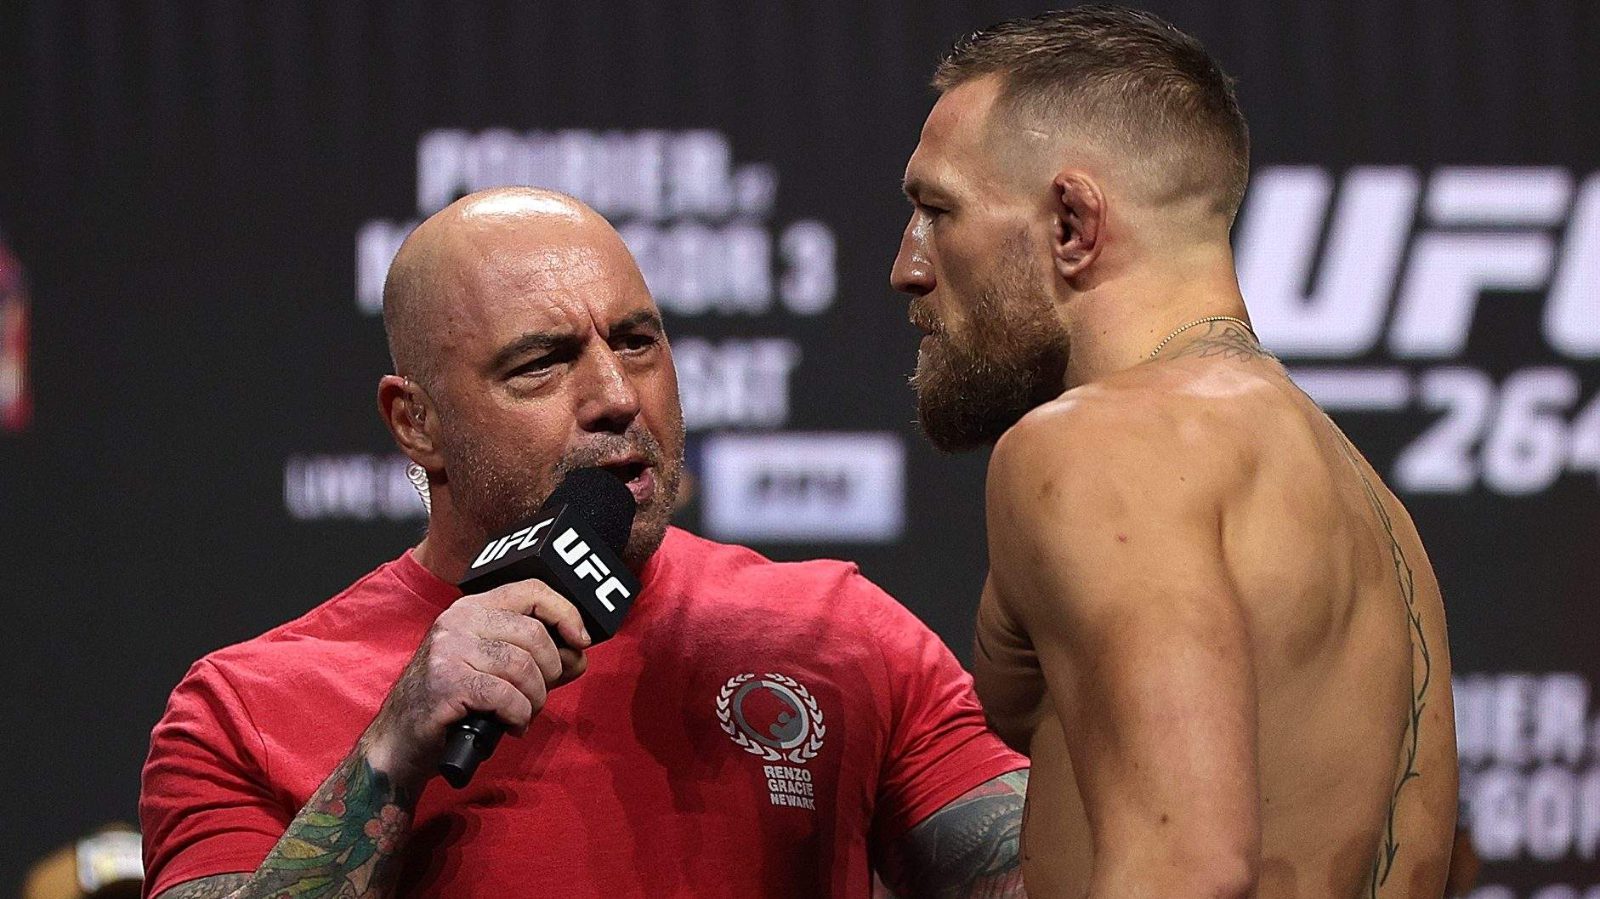 "I guarantee": Joe Rogan suggested who will be McGregor's next opponent